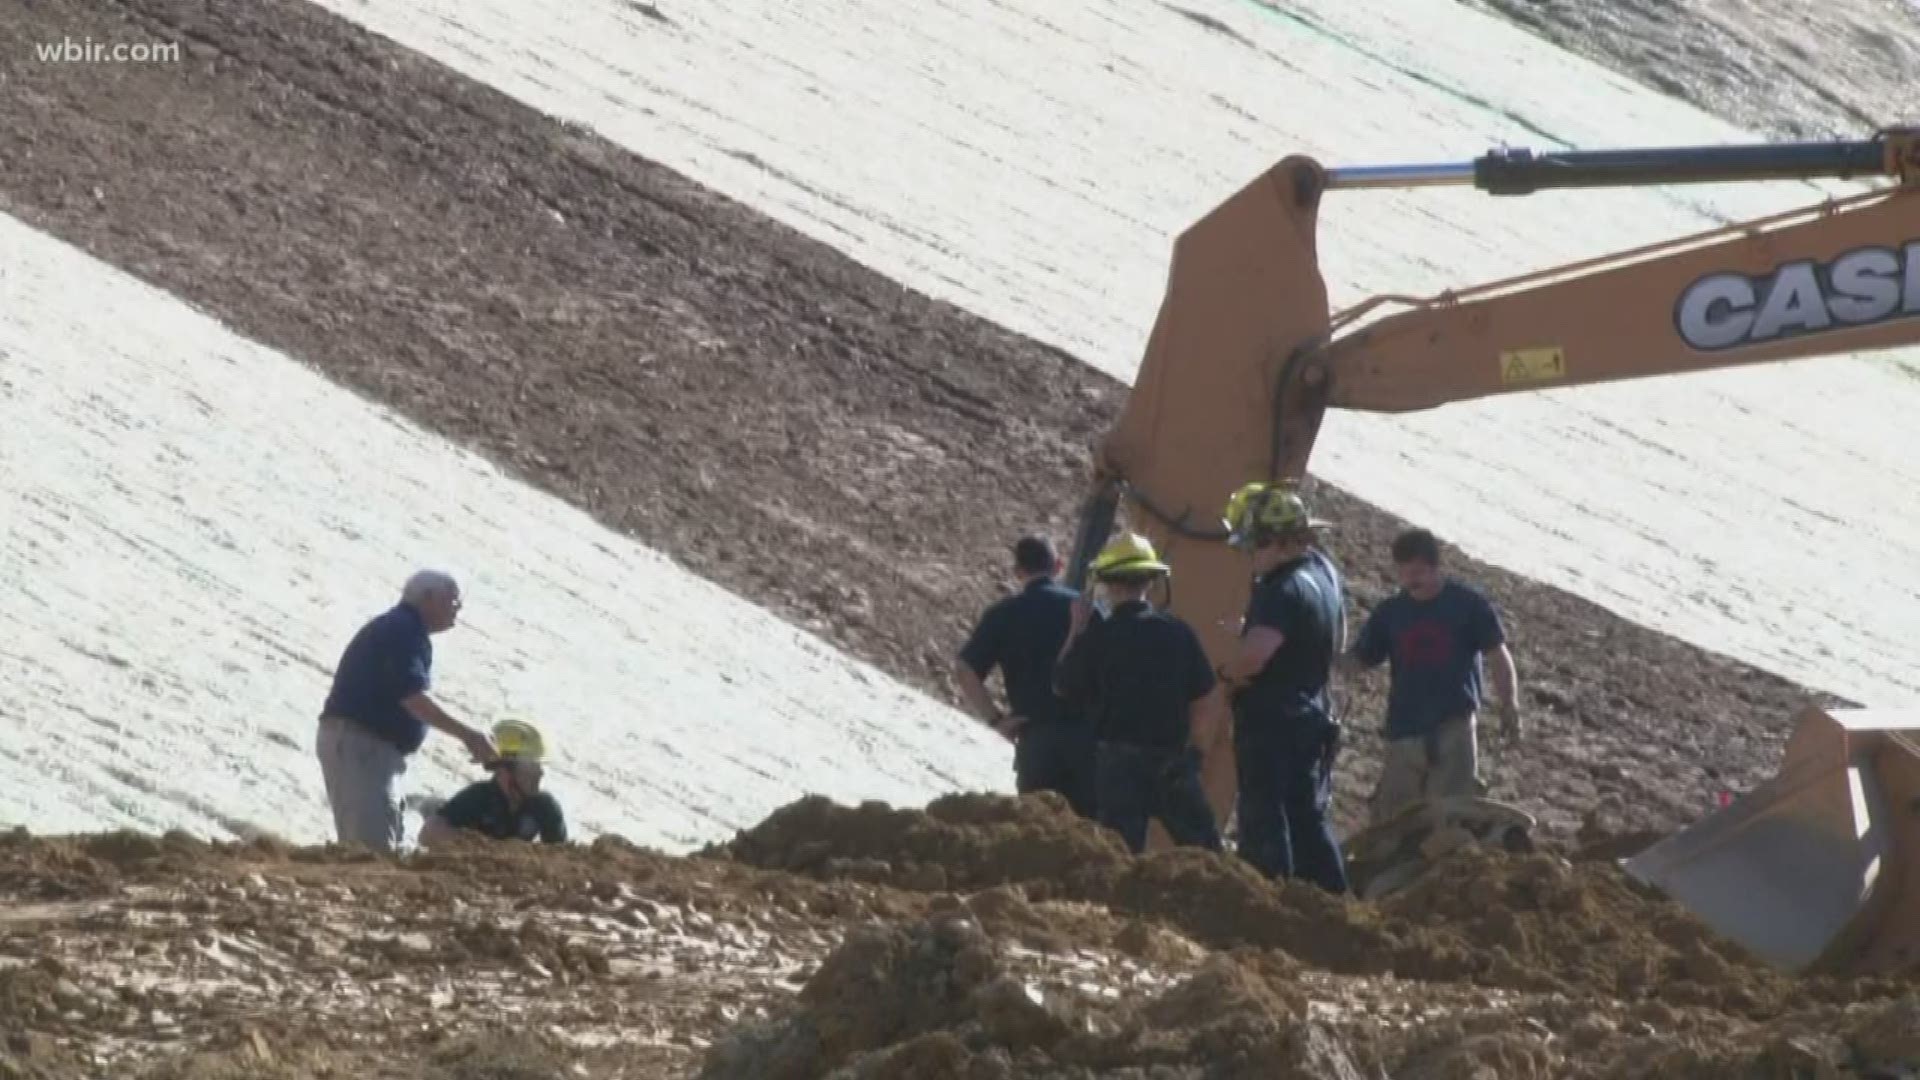 According to Knox County Rural Metro, a worker was trapped up to his waist in dirt at 8500 Westland Drive after a drainage ditch he and others had been working on co